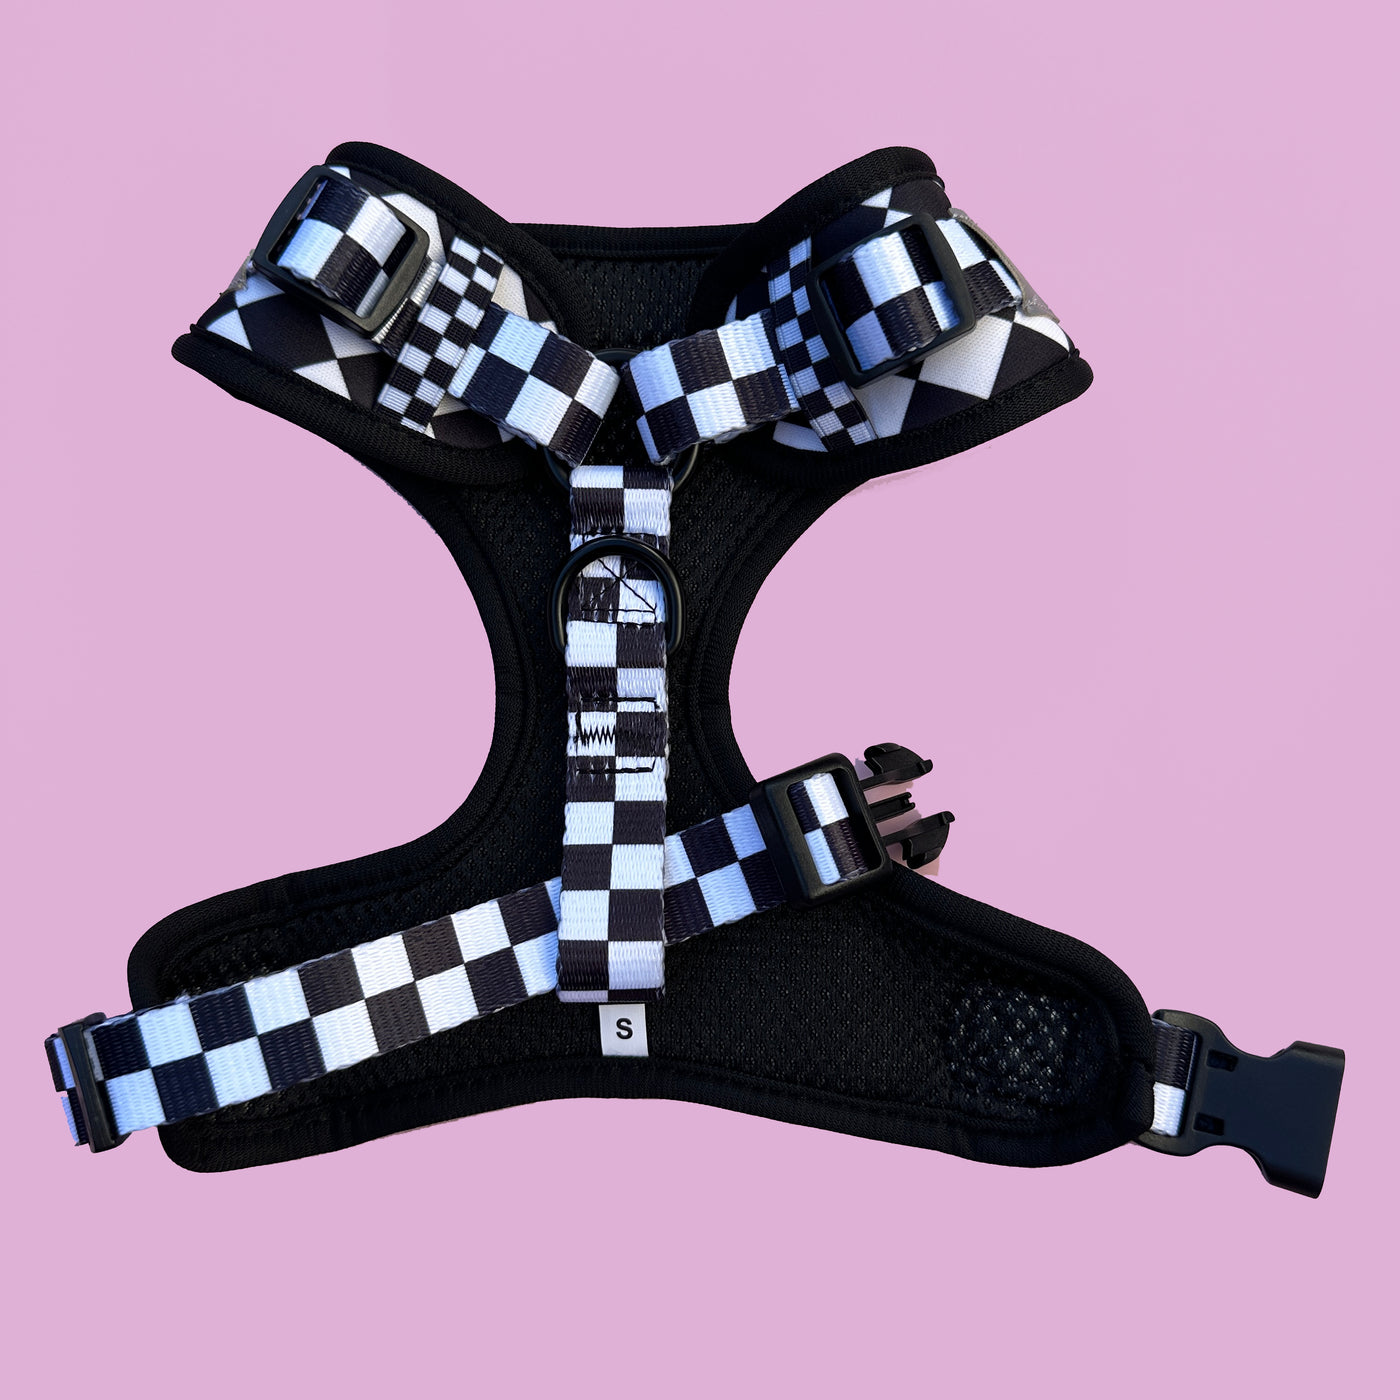 DOG HARNESS |Black and White Checkers | Neck Adjustable Dog Harness-BFF-Dizzy Dog Collars